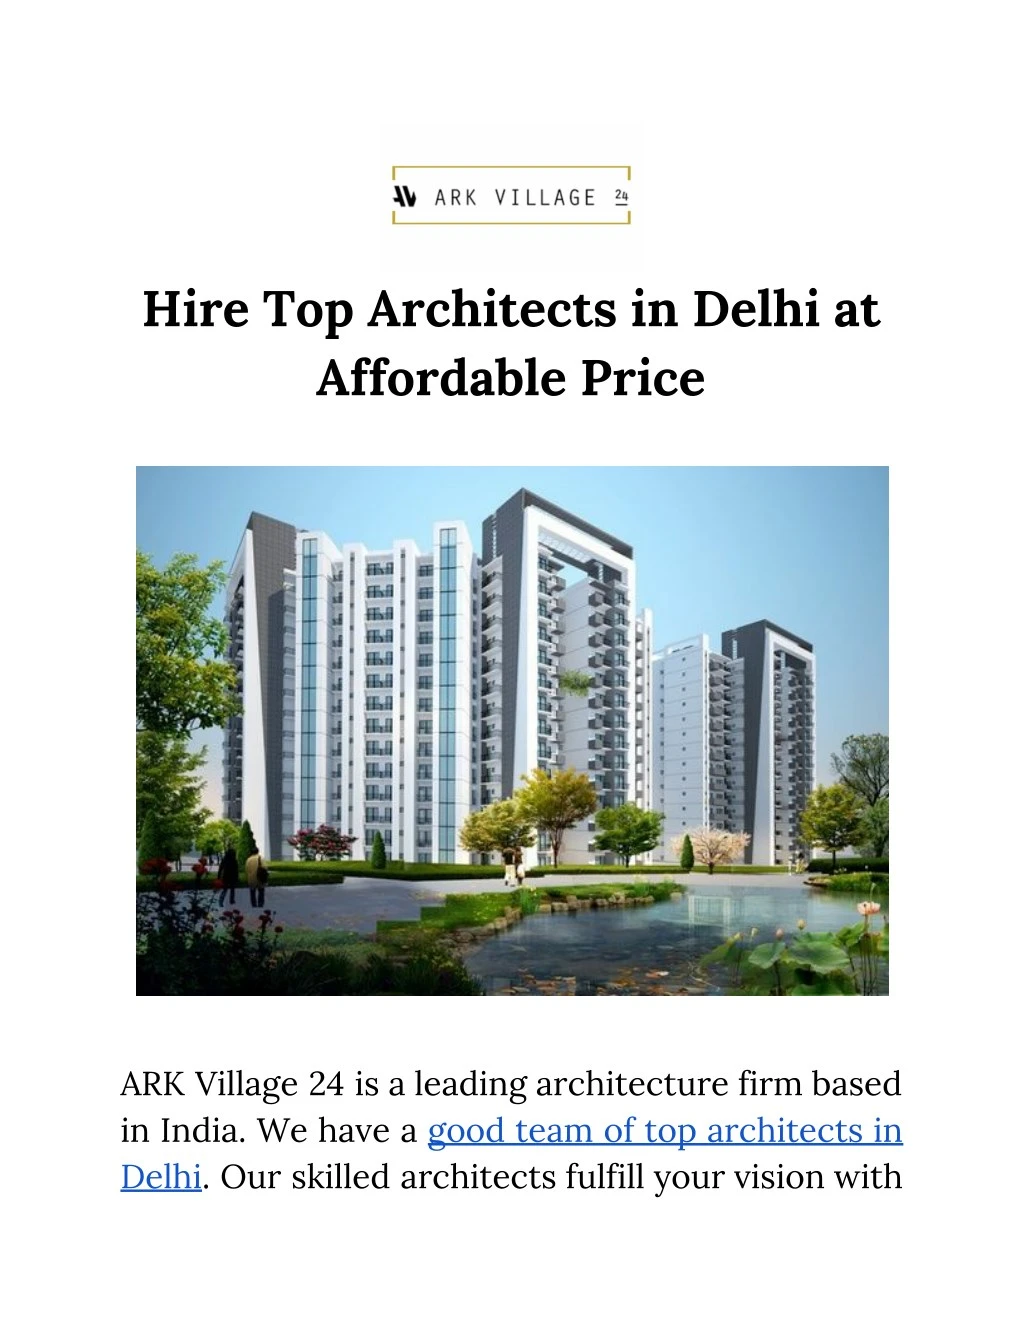 hire top architects in delhi at affordable price